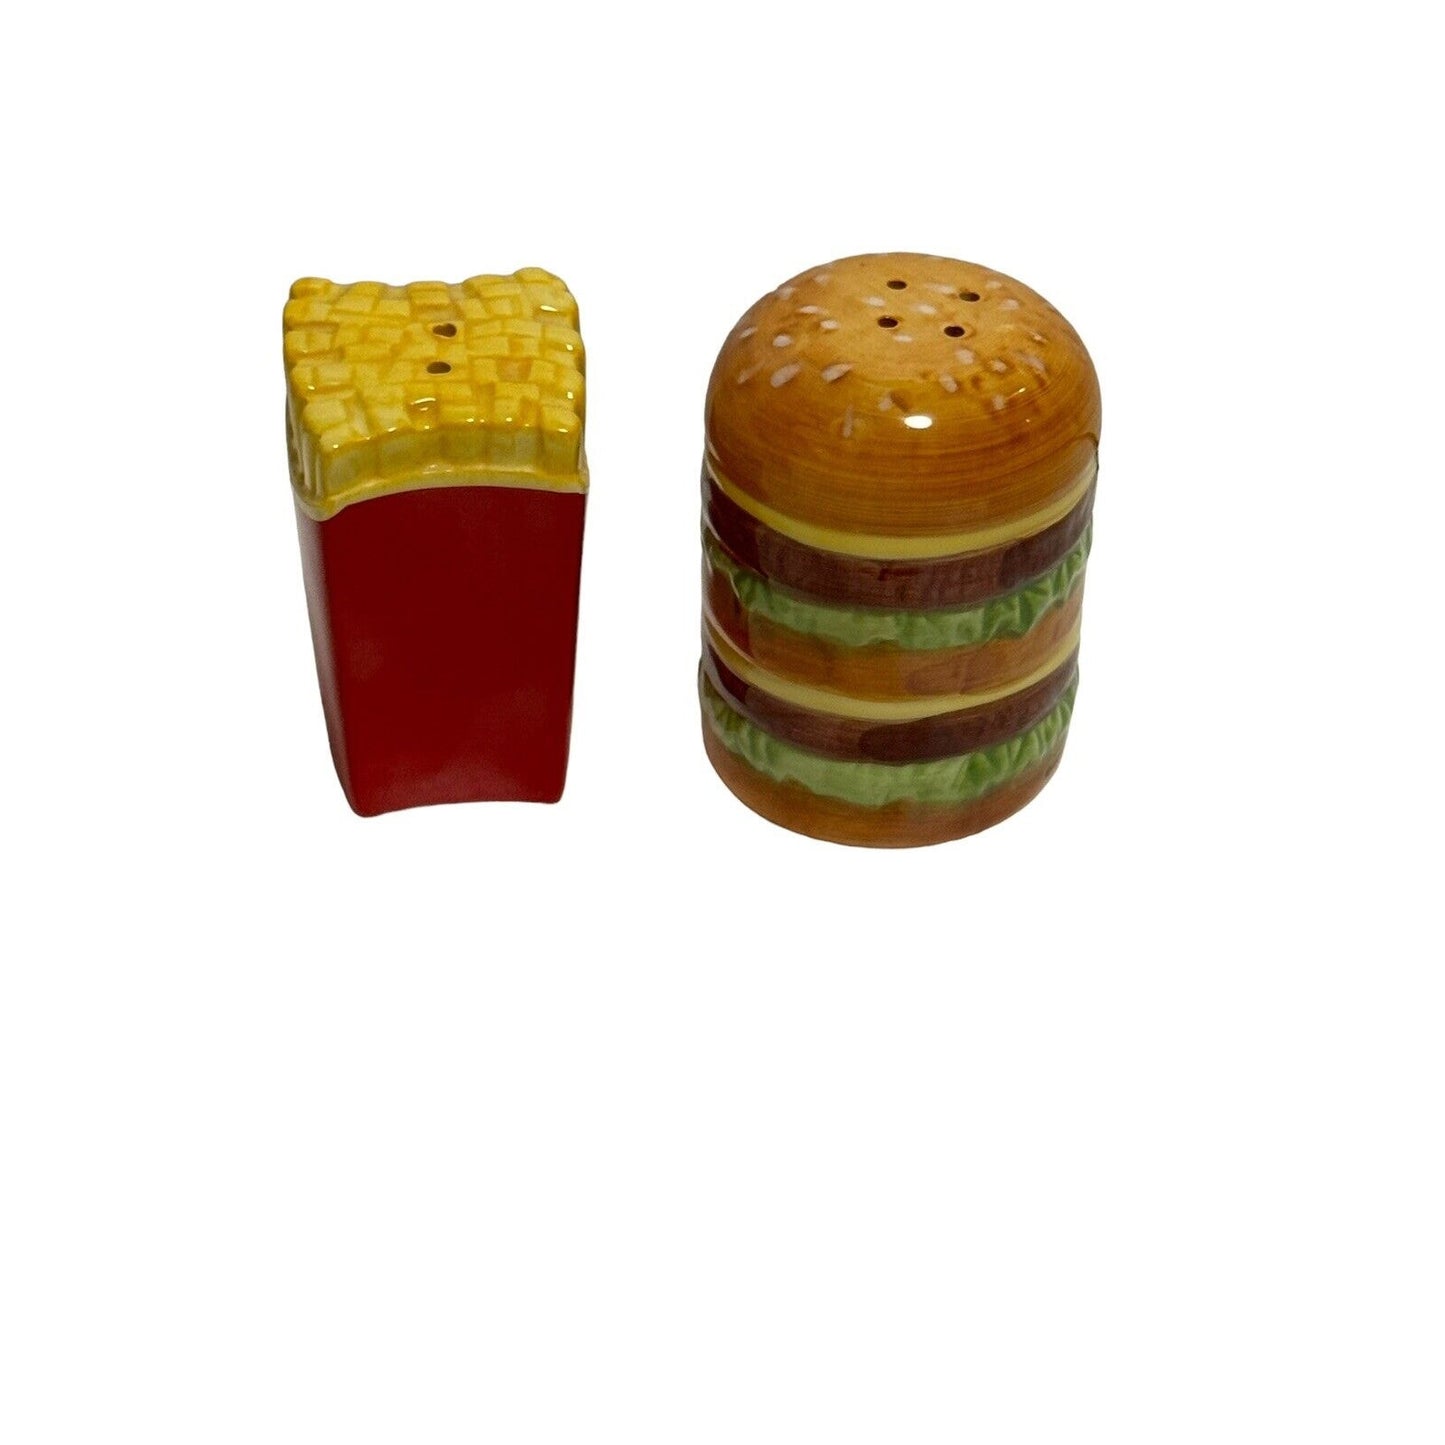 Vintage McDonald's Salt & Pepper Shakers Cheeseburger & French Fries 2002 Giftco